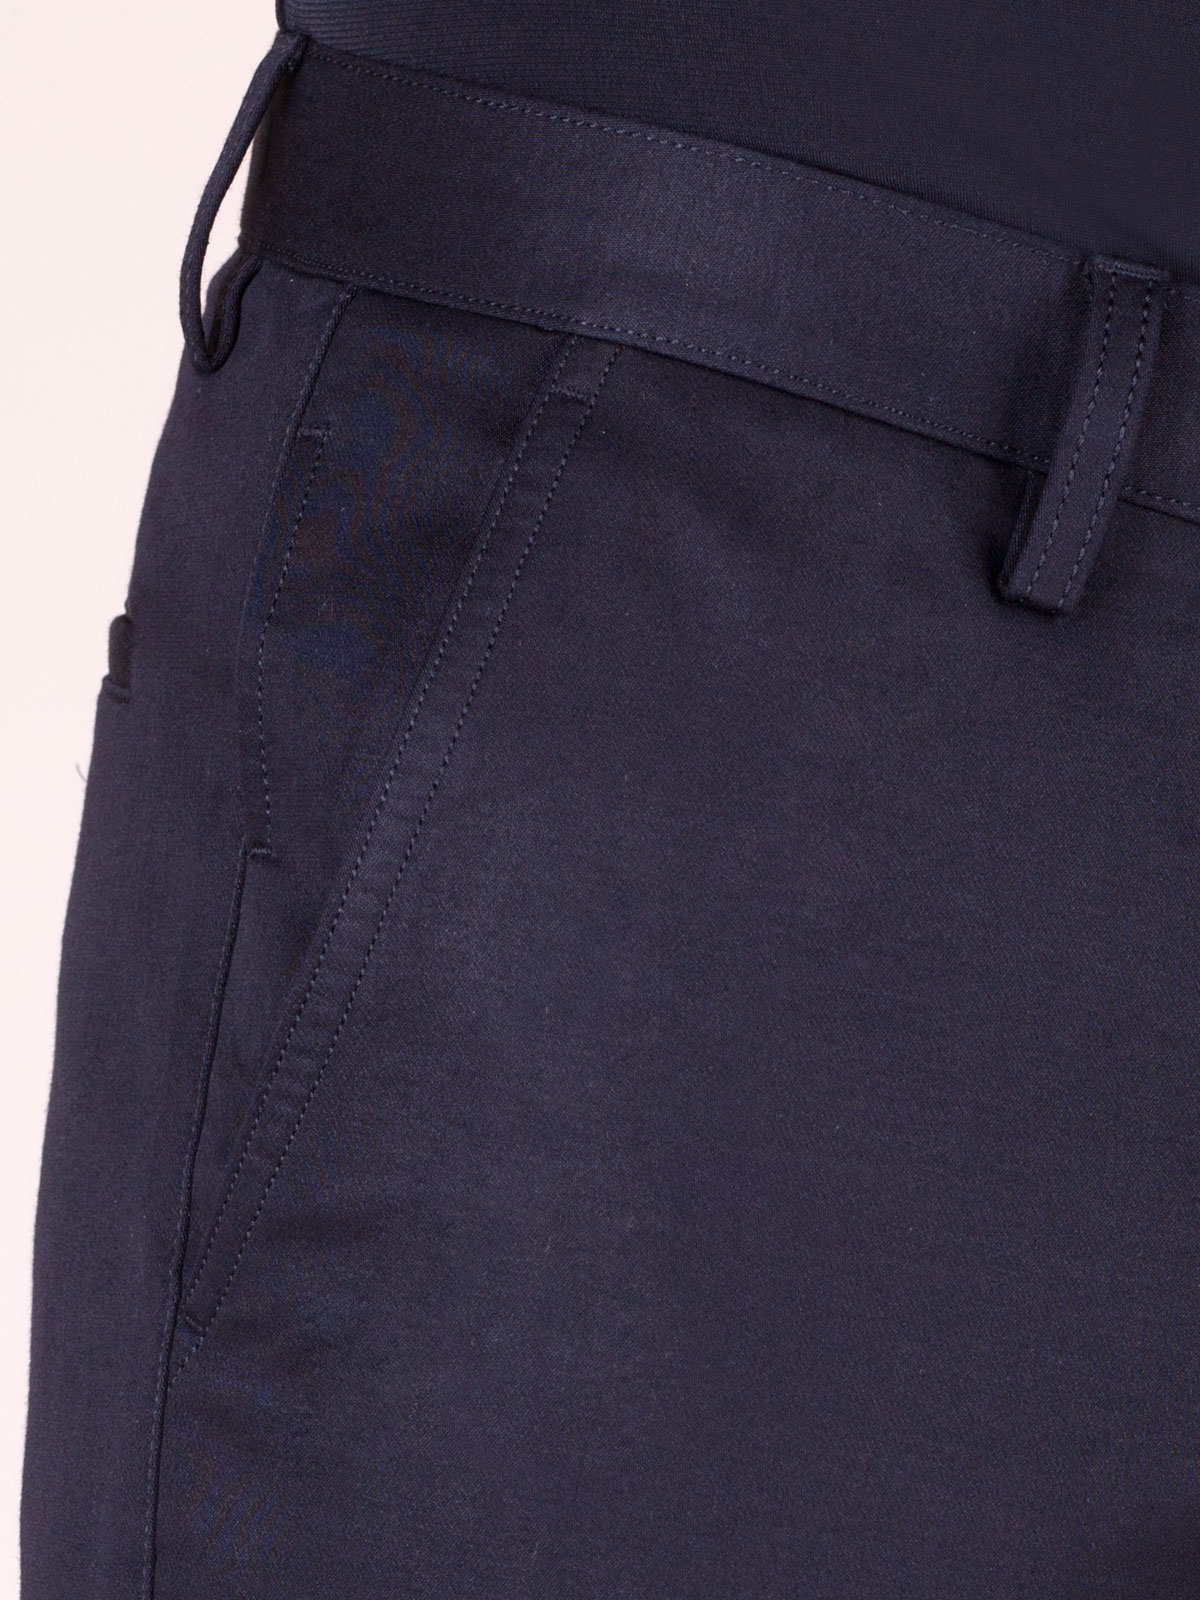 Black trousers with straight cut - 60247 € 14.06 img3